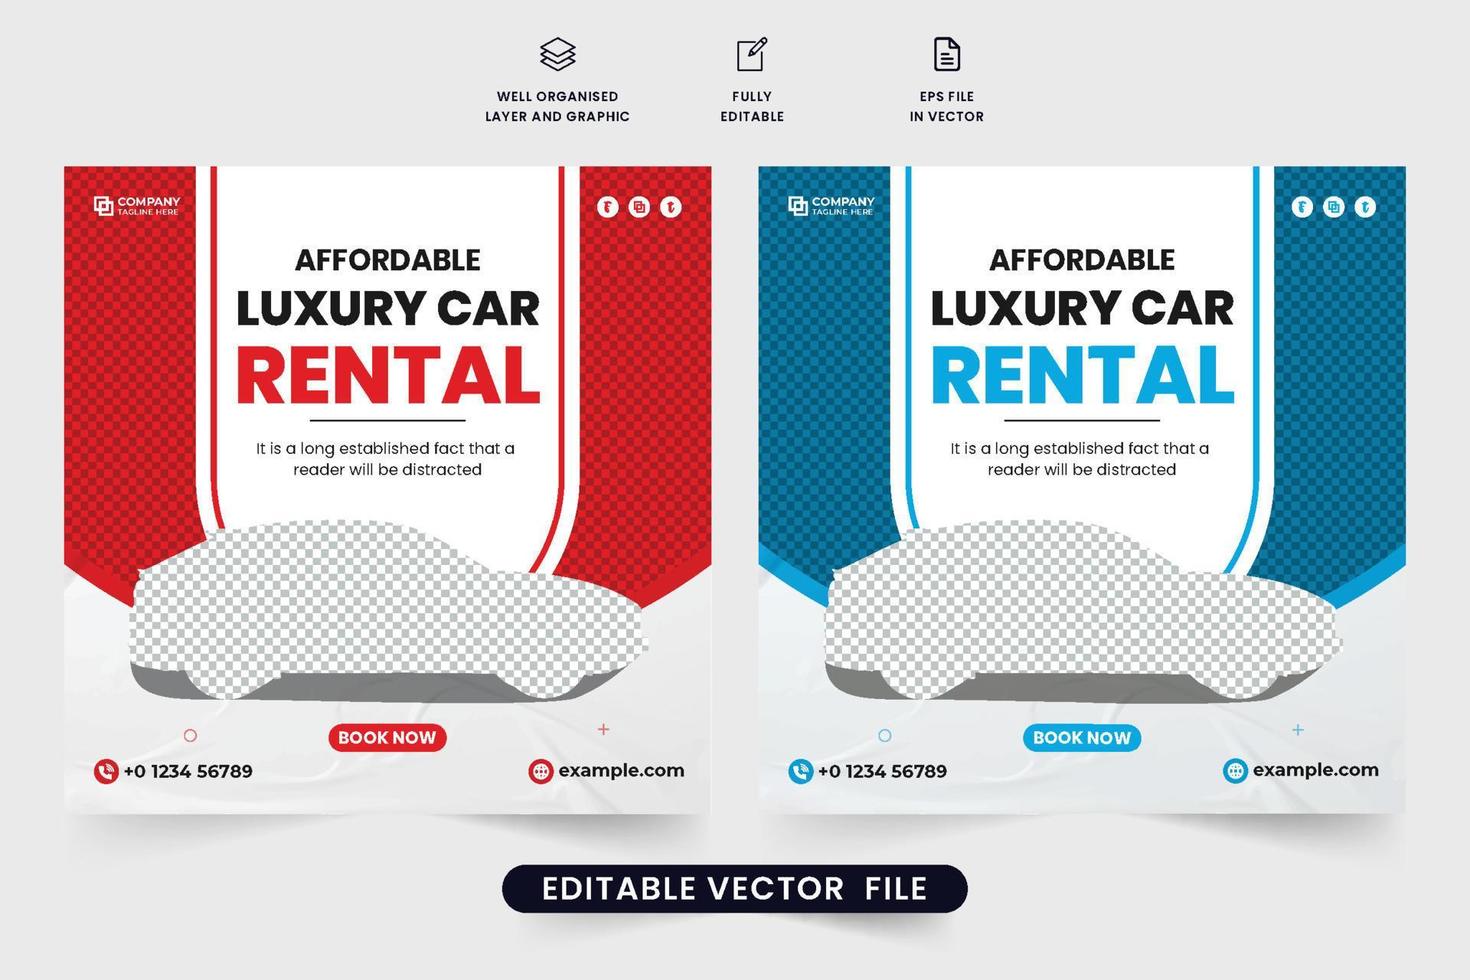 Modern car rental business template vector with red and blue colors. Vehicle management and rental business promotion template. Rent a car social media post vector with creative shapes.